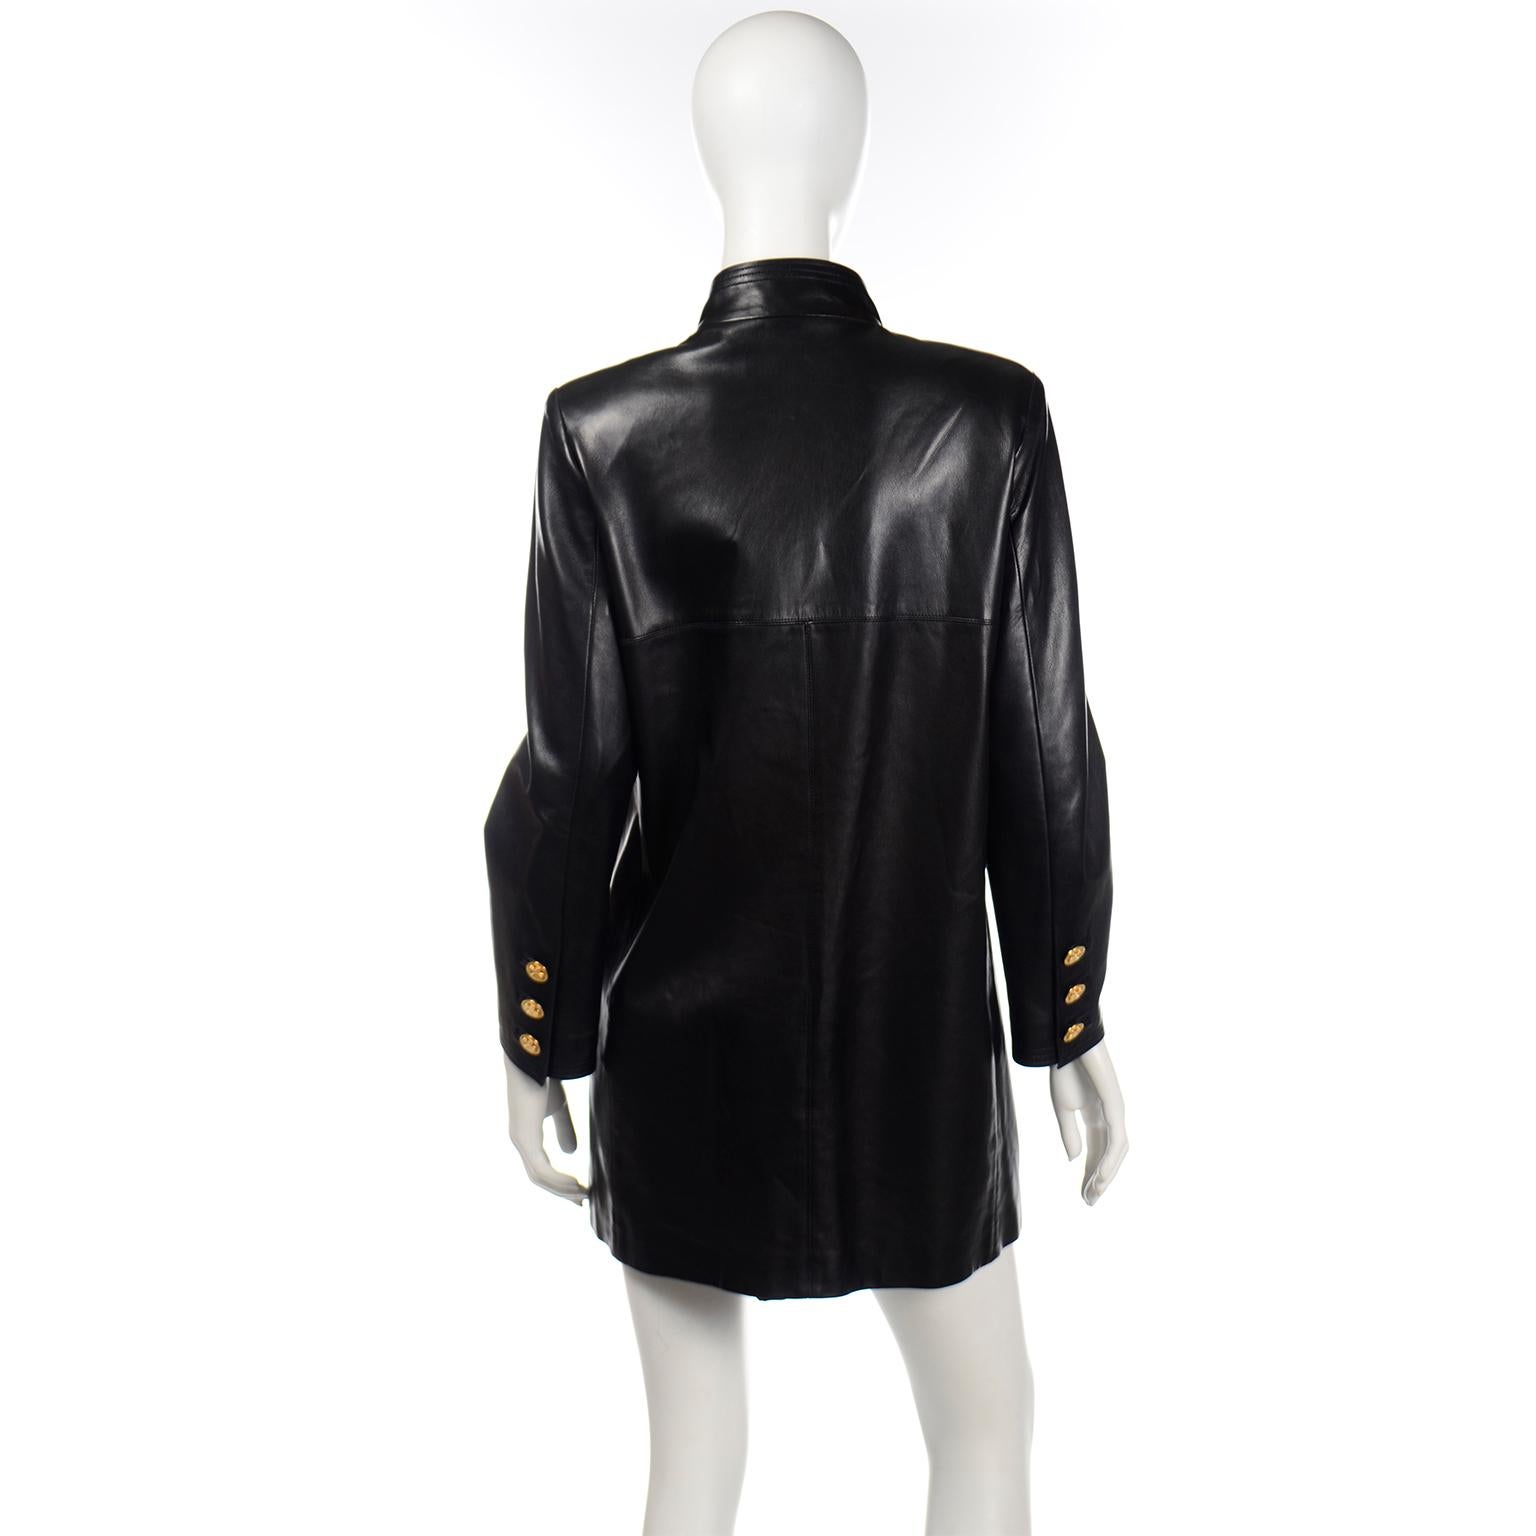 Women's Chanel Vintage Black Leather Jacket with 4 Leaf Clover Gold Buttons